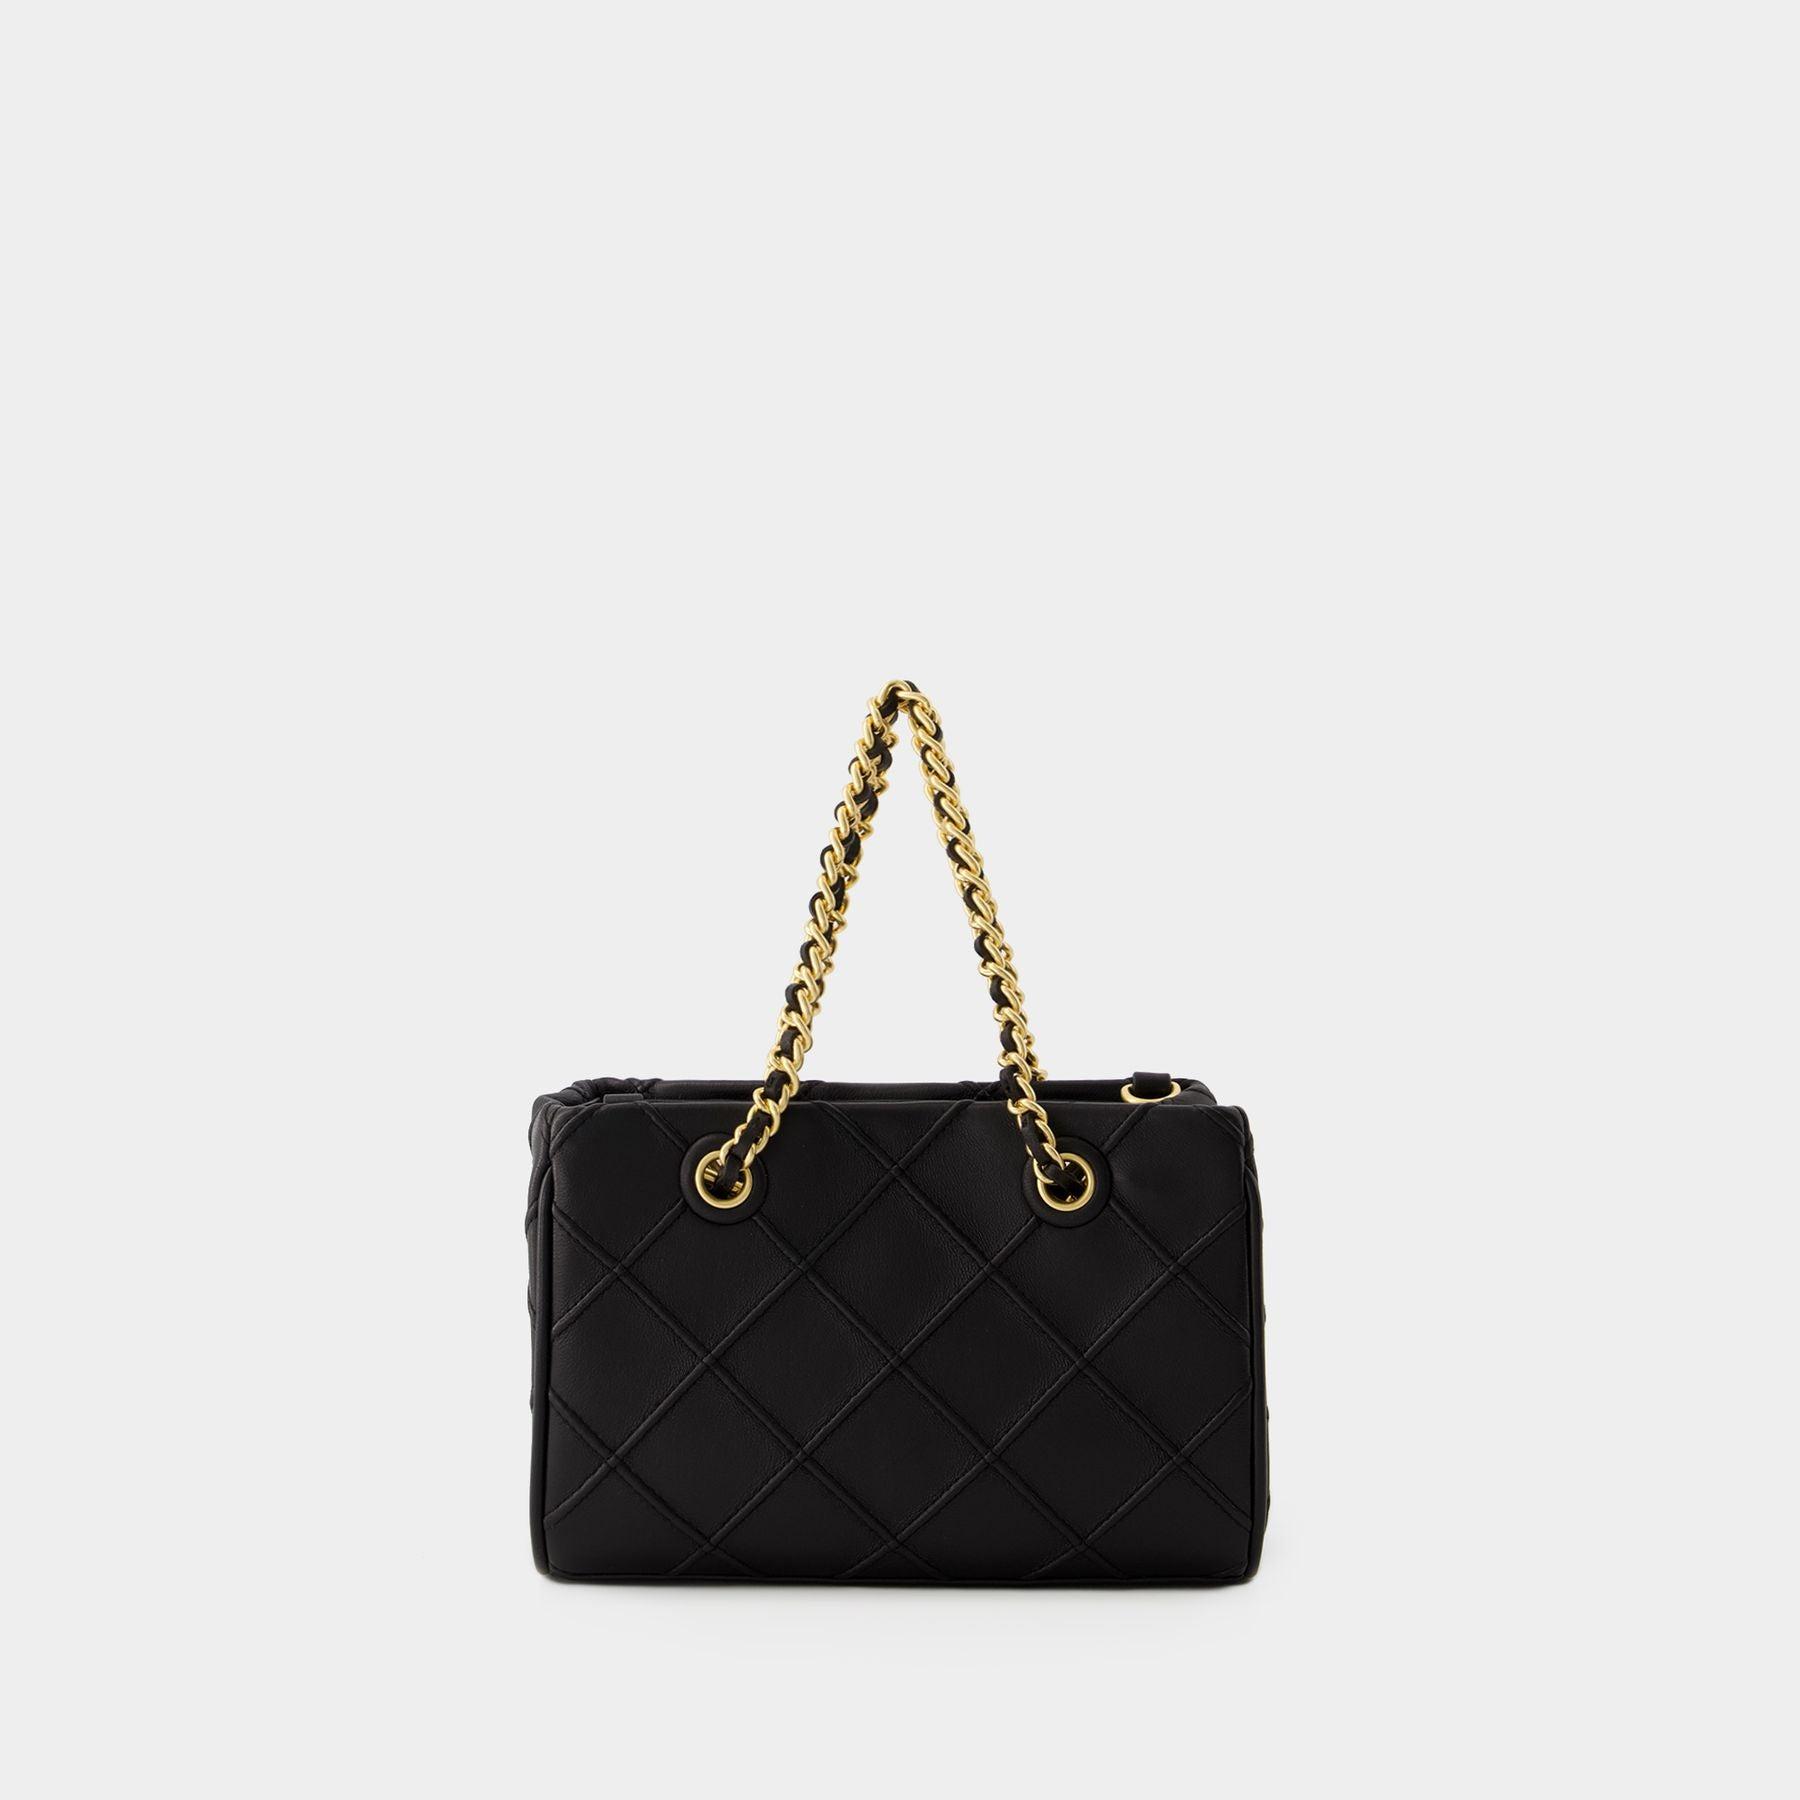 Tory Burch 'fleming' Quilted Shopper Bag in Natural